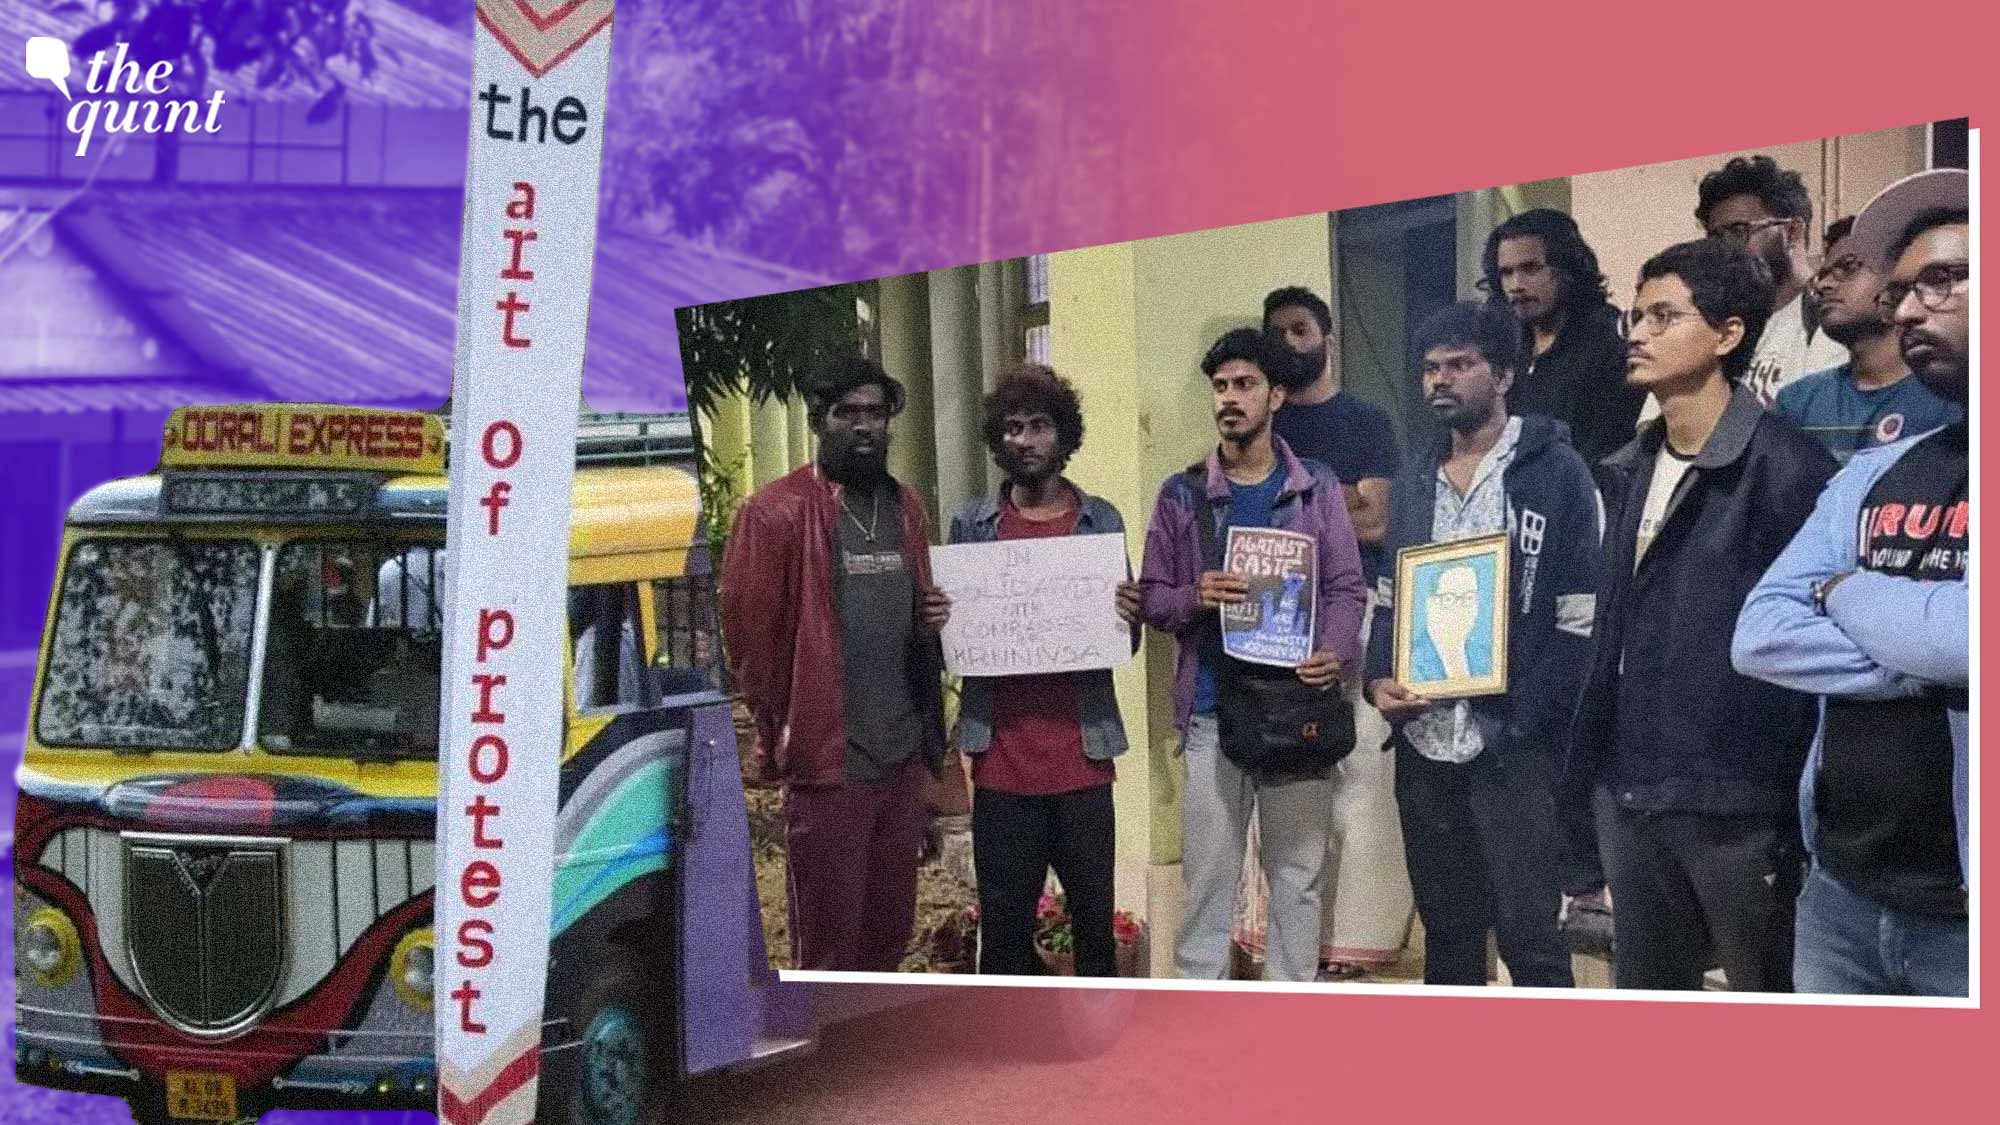 <div class="paragraphs"><p>Oorali Band was also part of the 'Art for Protest' at the film school.&nbsp;</p></div>